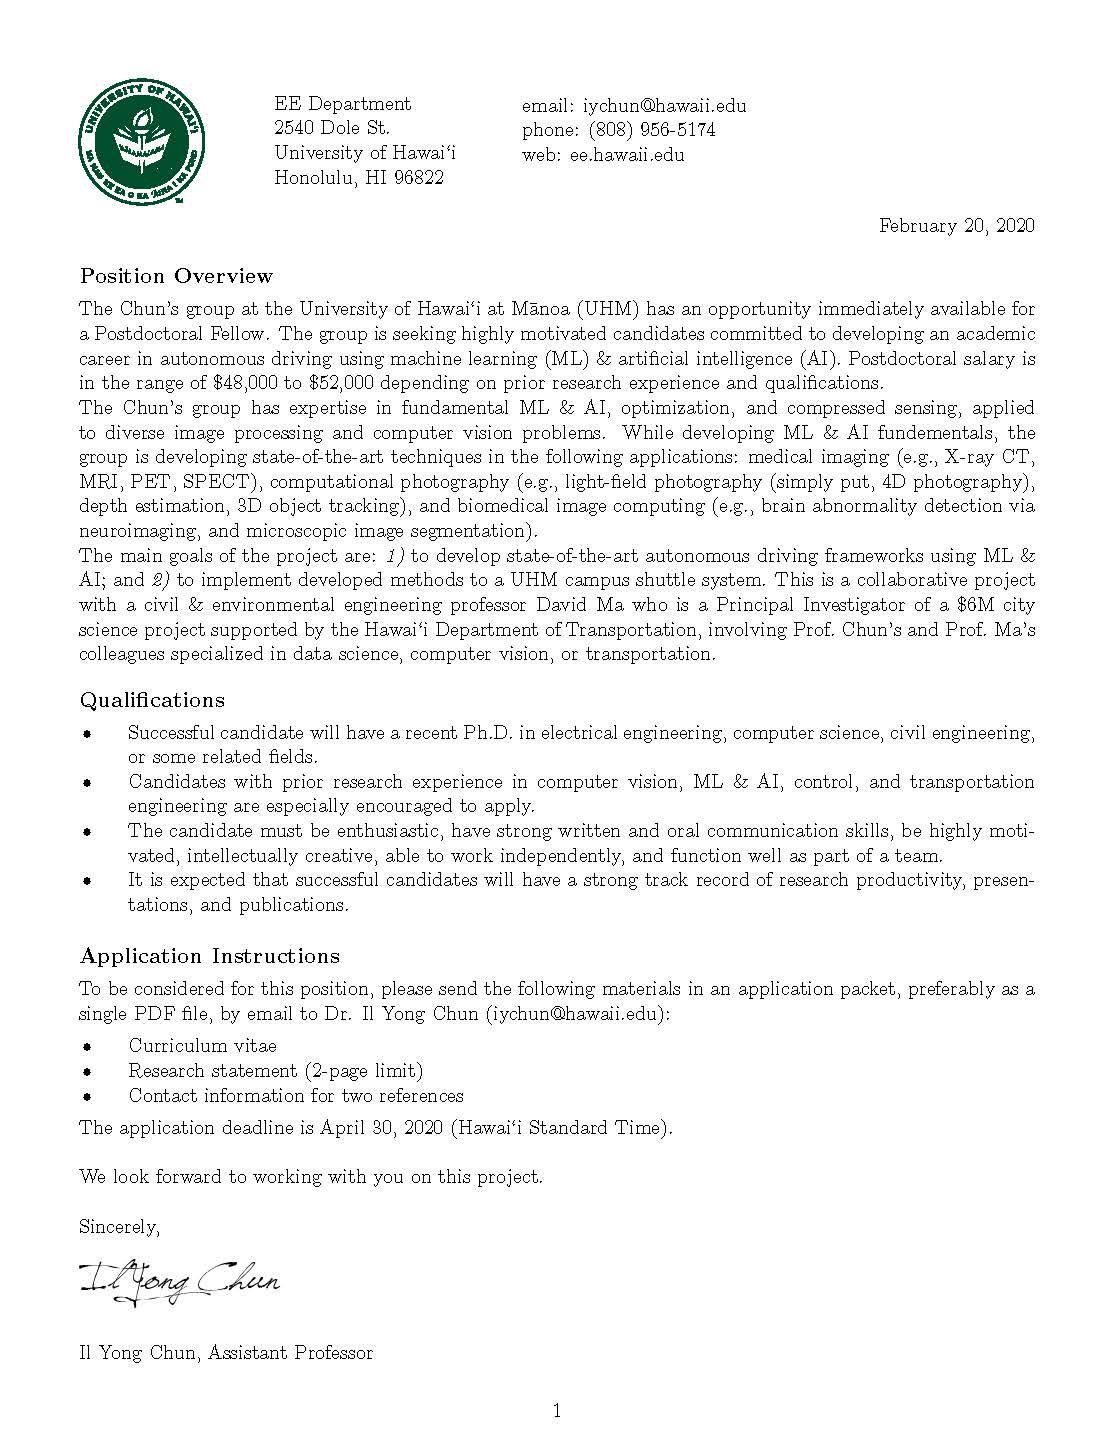 Announcement for Postdoctoral Fellow Positions in the University of Hawaii at Manoa (UHM)